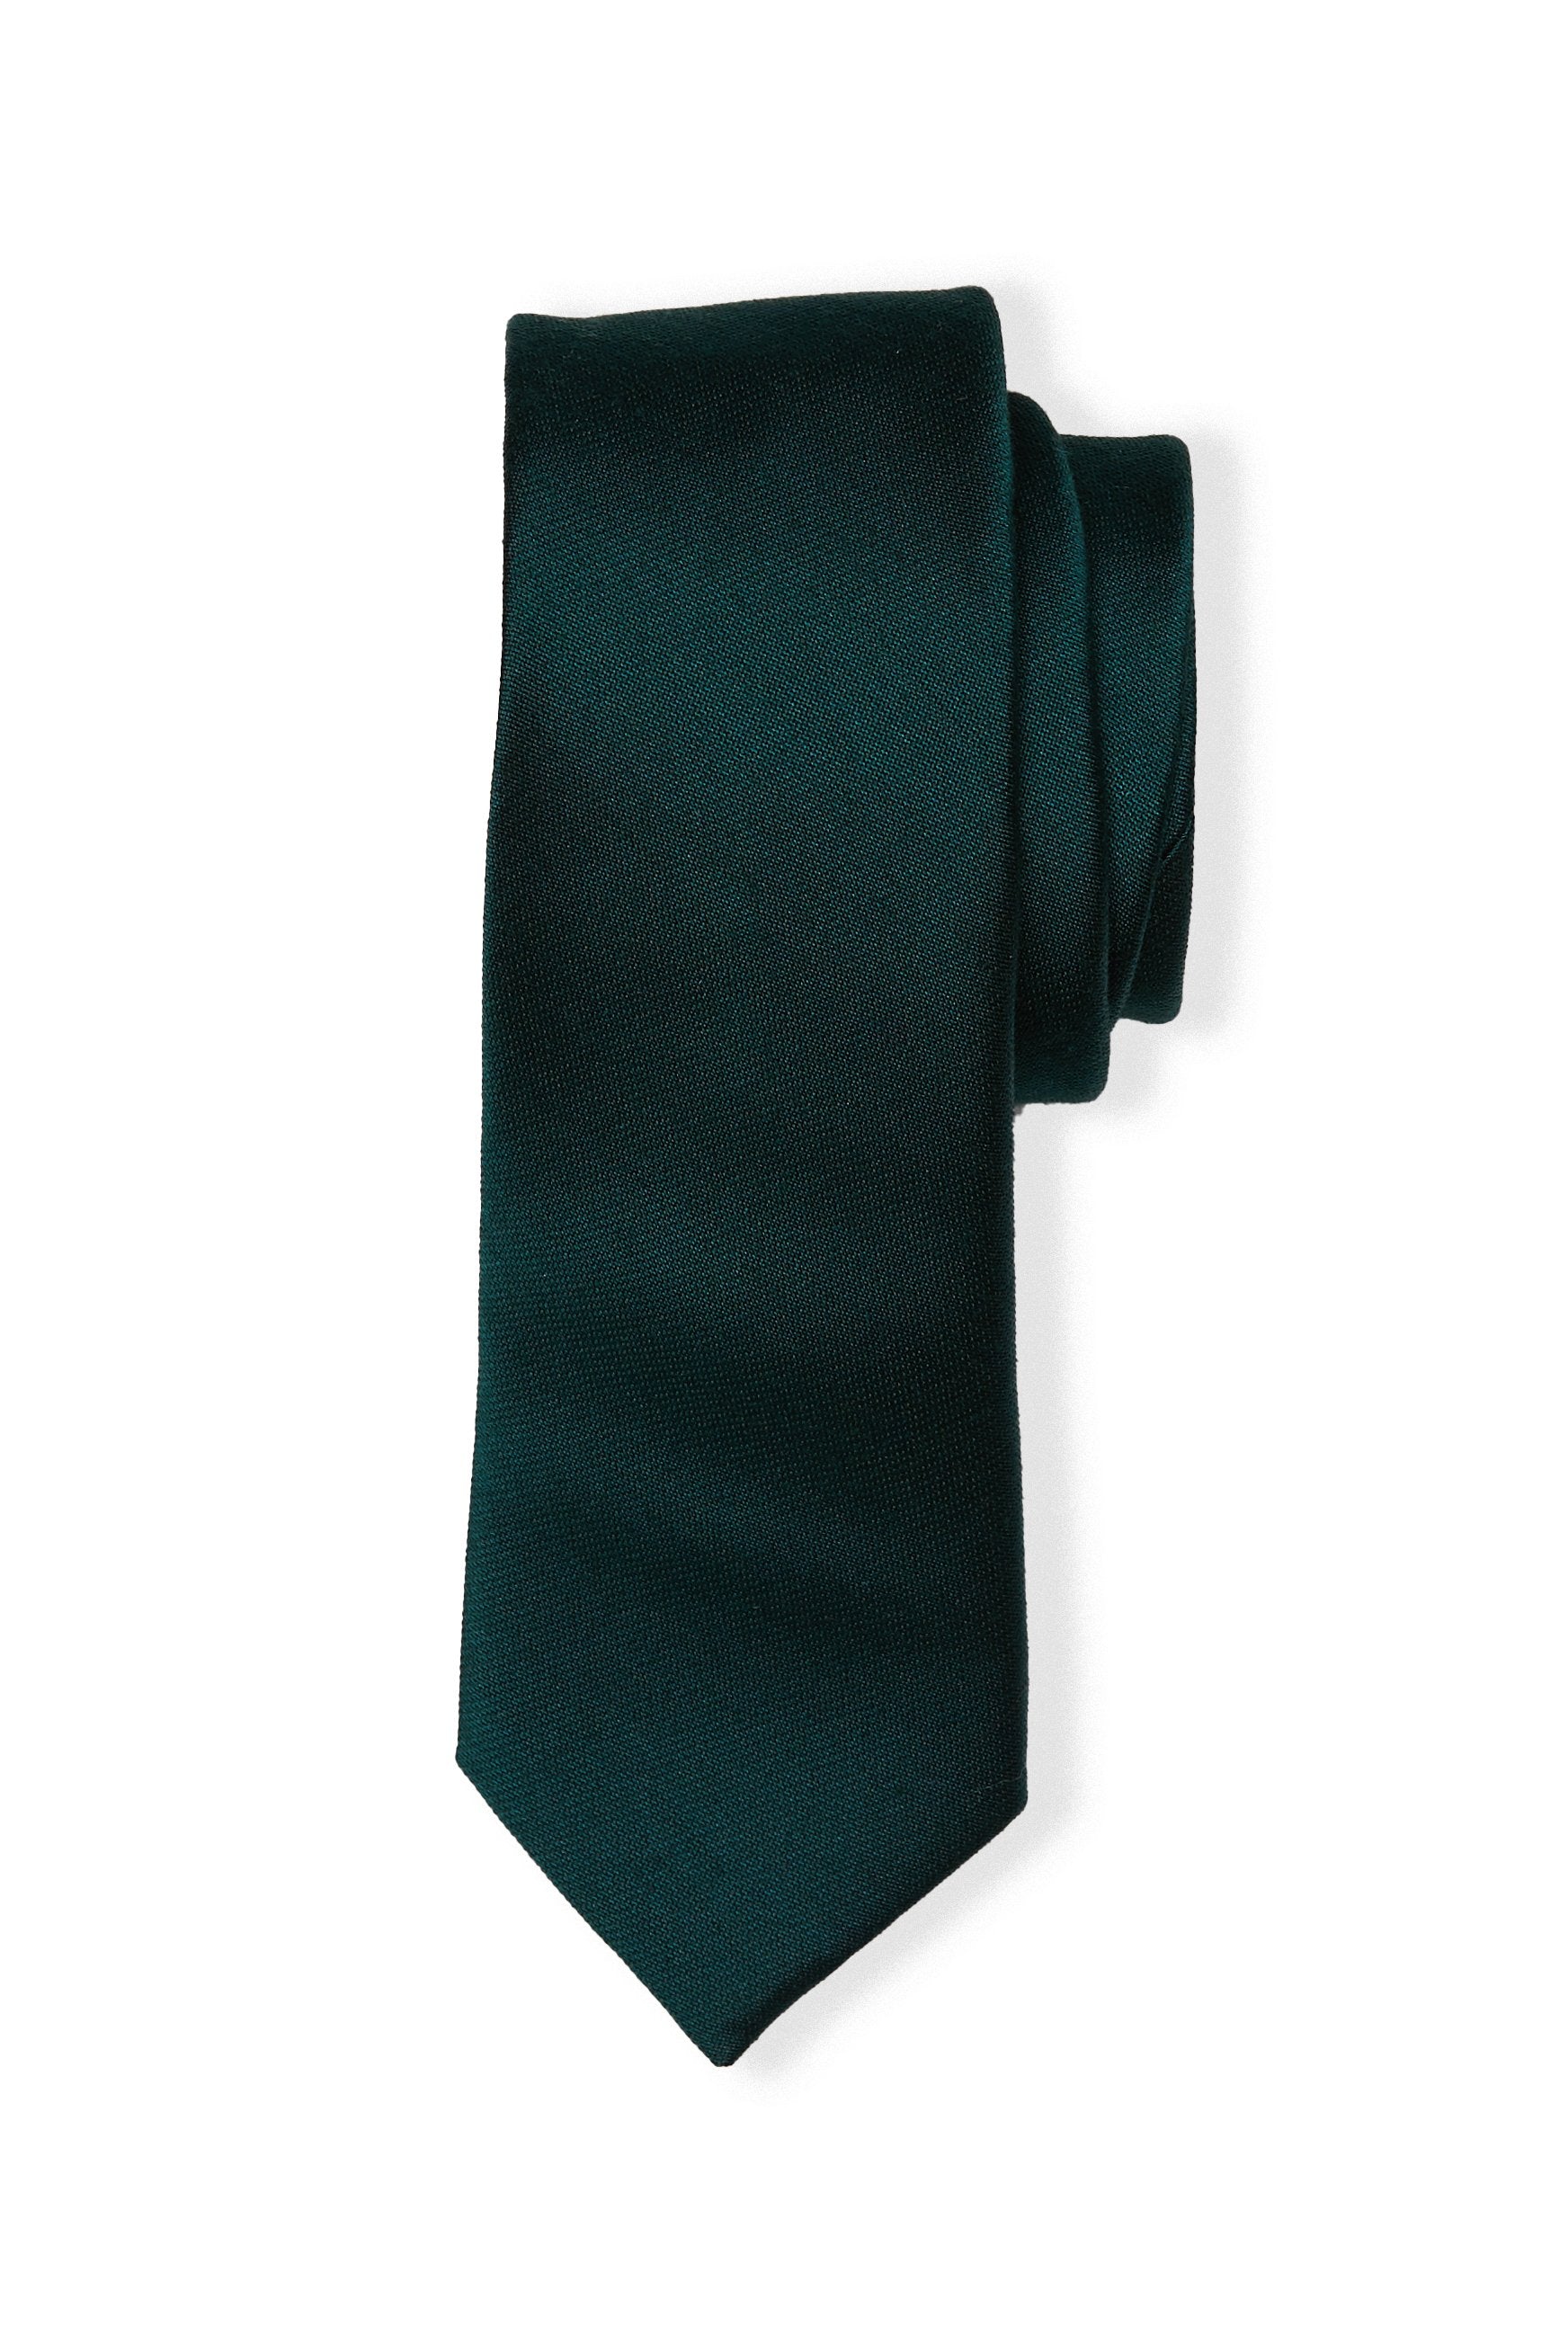 Front close up view of the Simon Necktie in emerald rolled up with the pointed necktie end extended showing the material texture and sheen.